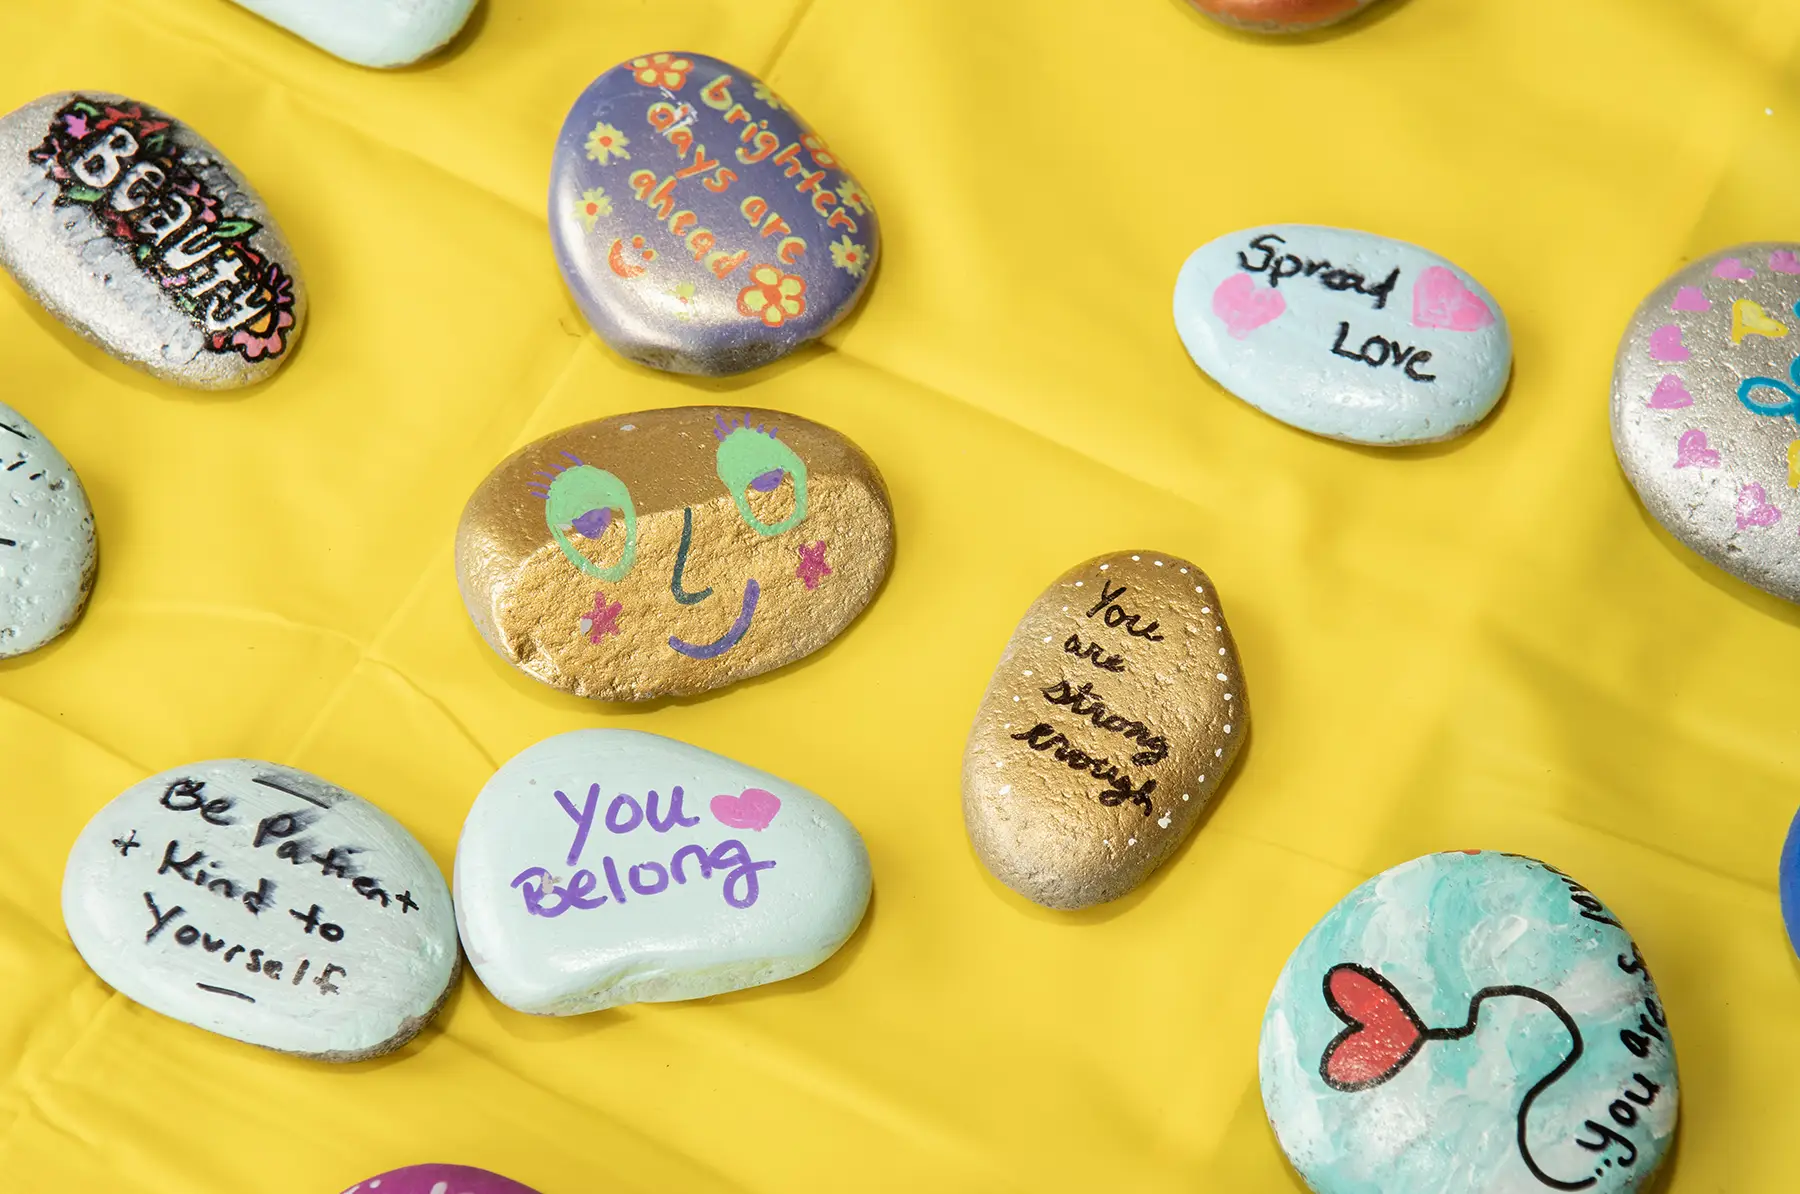 Rocks painted with messages of positivity and kindness.